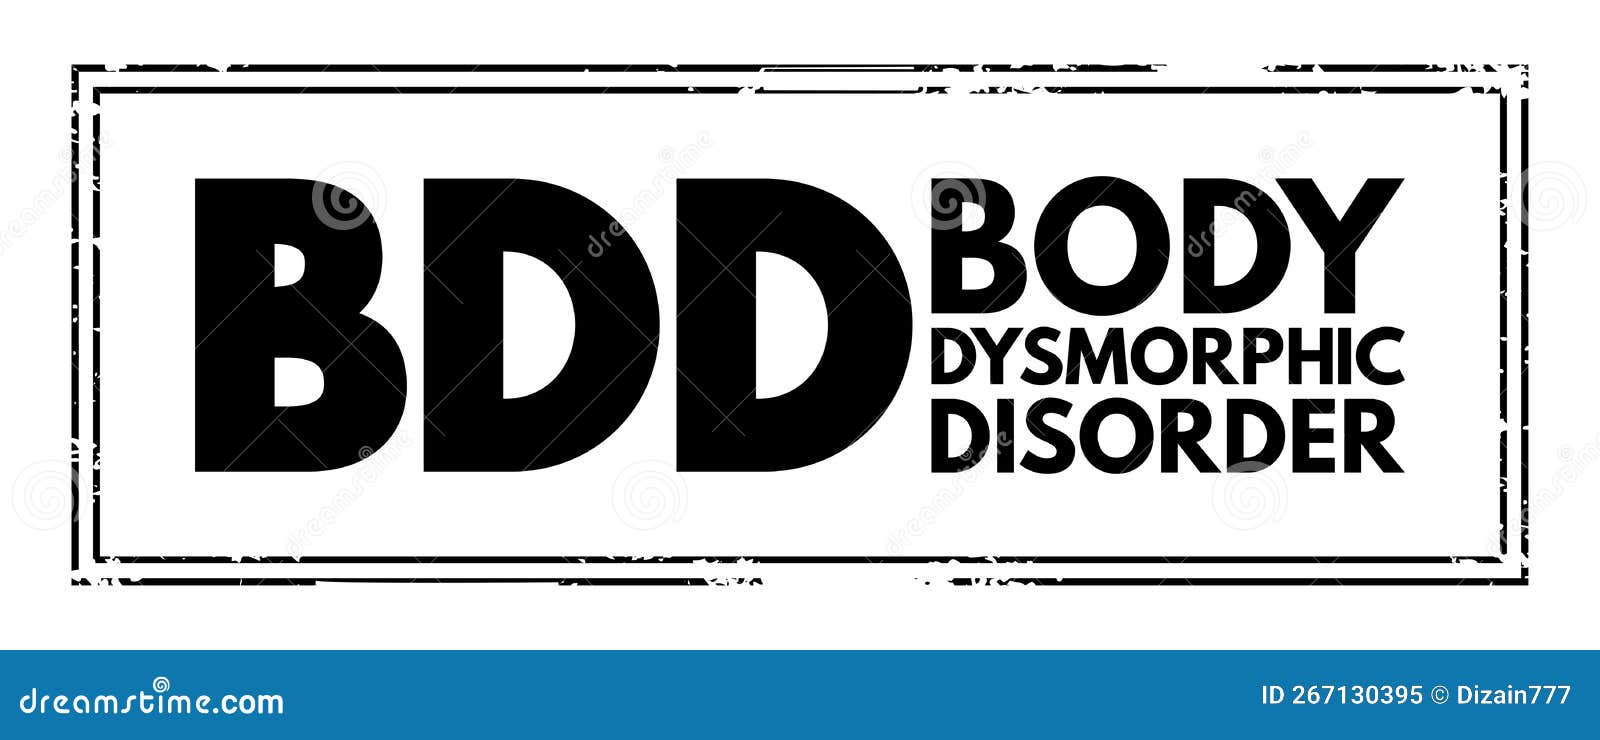 bdd - body dysmorphic disorder is a mental health disorder, acronym text concept stamp